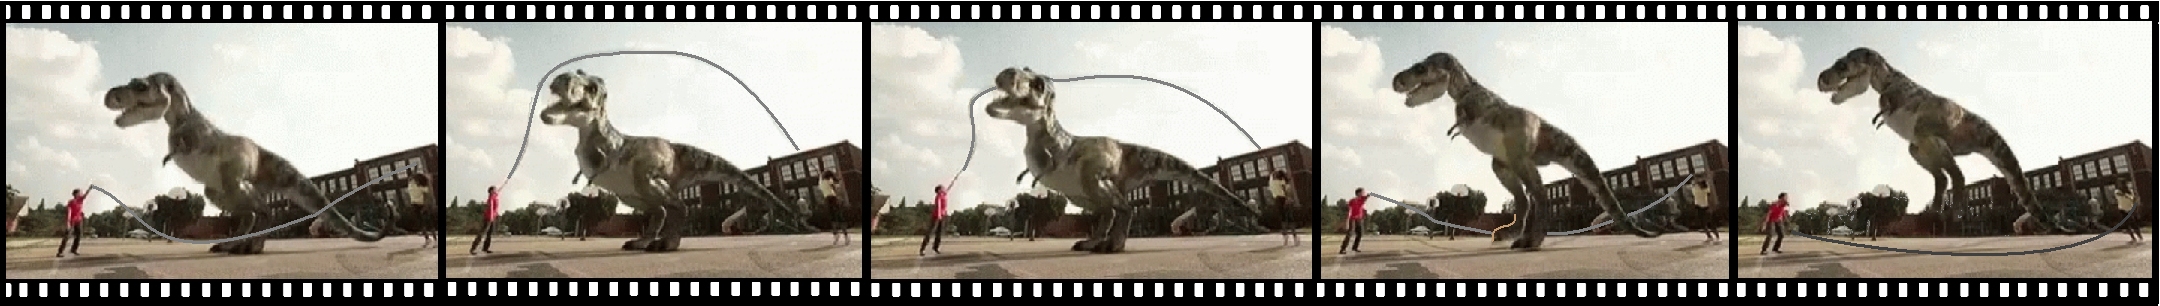 Filmstrip: Two people twirling a rope that a T-Rex is jumping